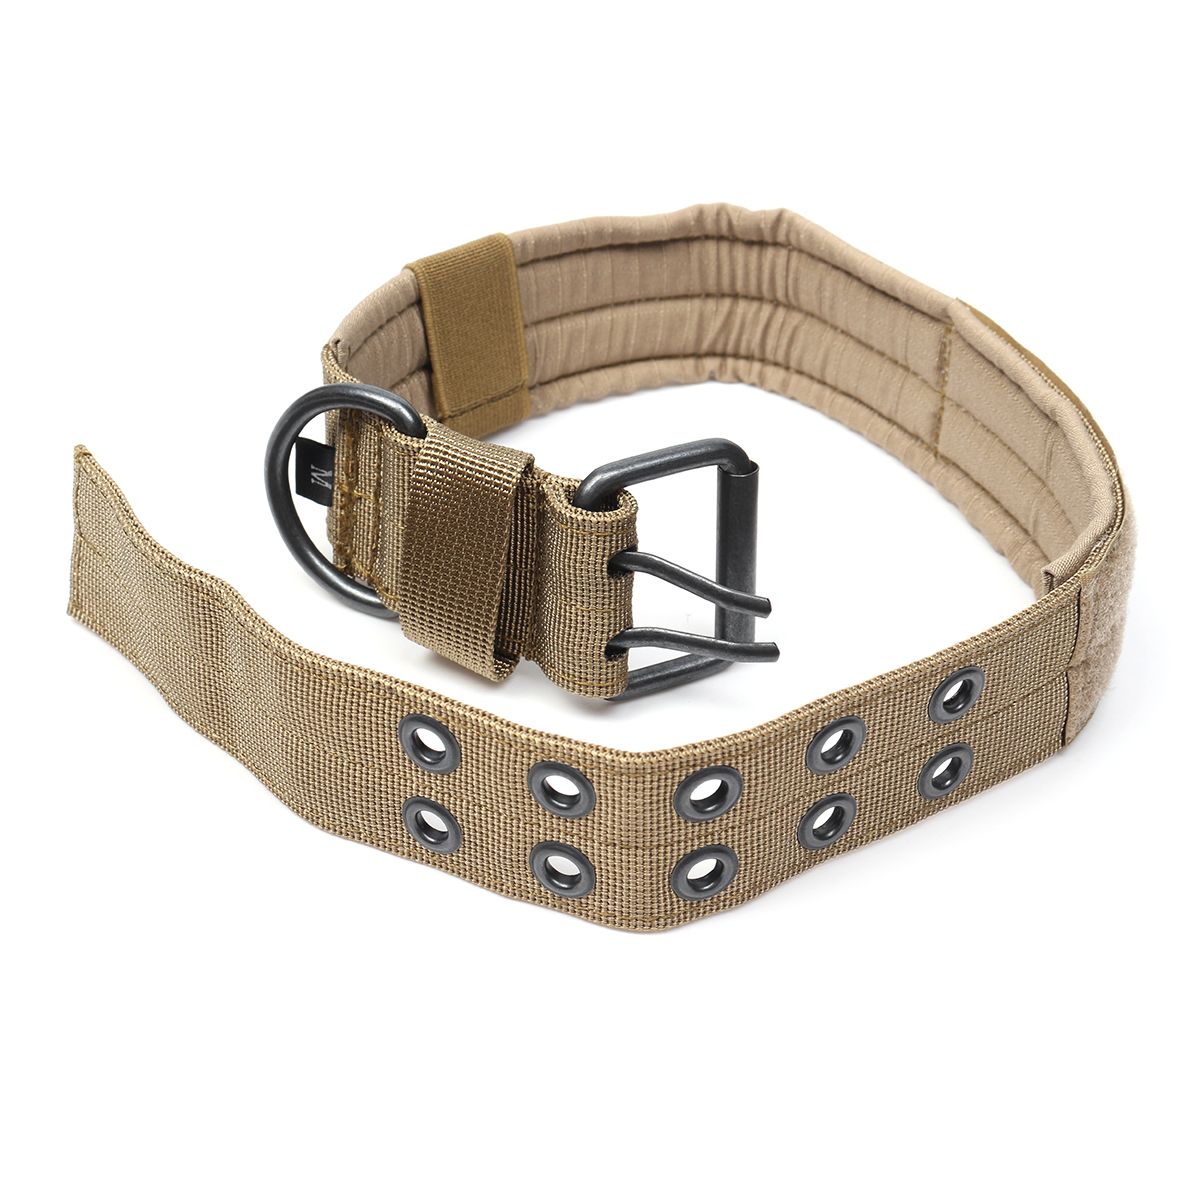 Adjustable-Training-Dog-Collar-Nylon-Tactical-Dog-Collar-Military-With-Metal-D-Ring-Buckle-1366535